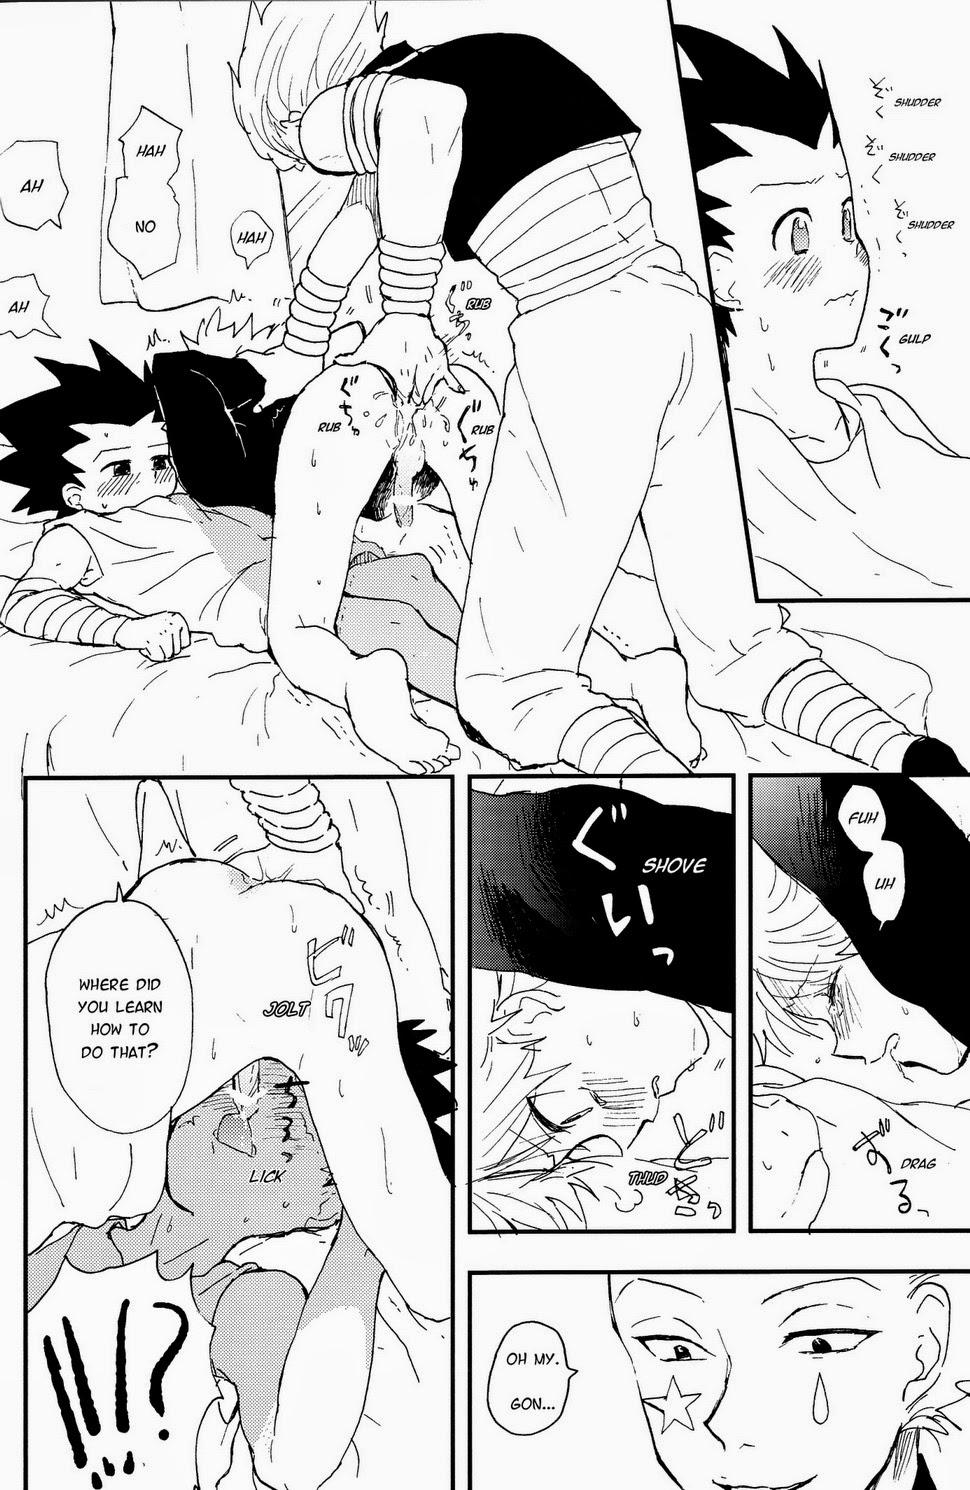 Ikillitts Okosama Lunch - Hunter x hunter Officesex - Page 7